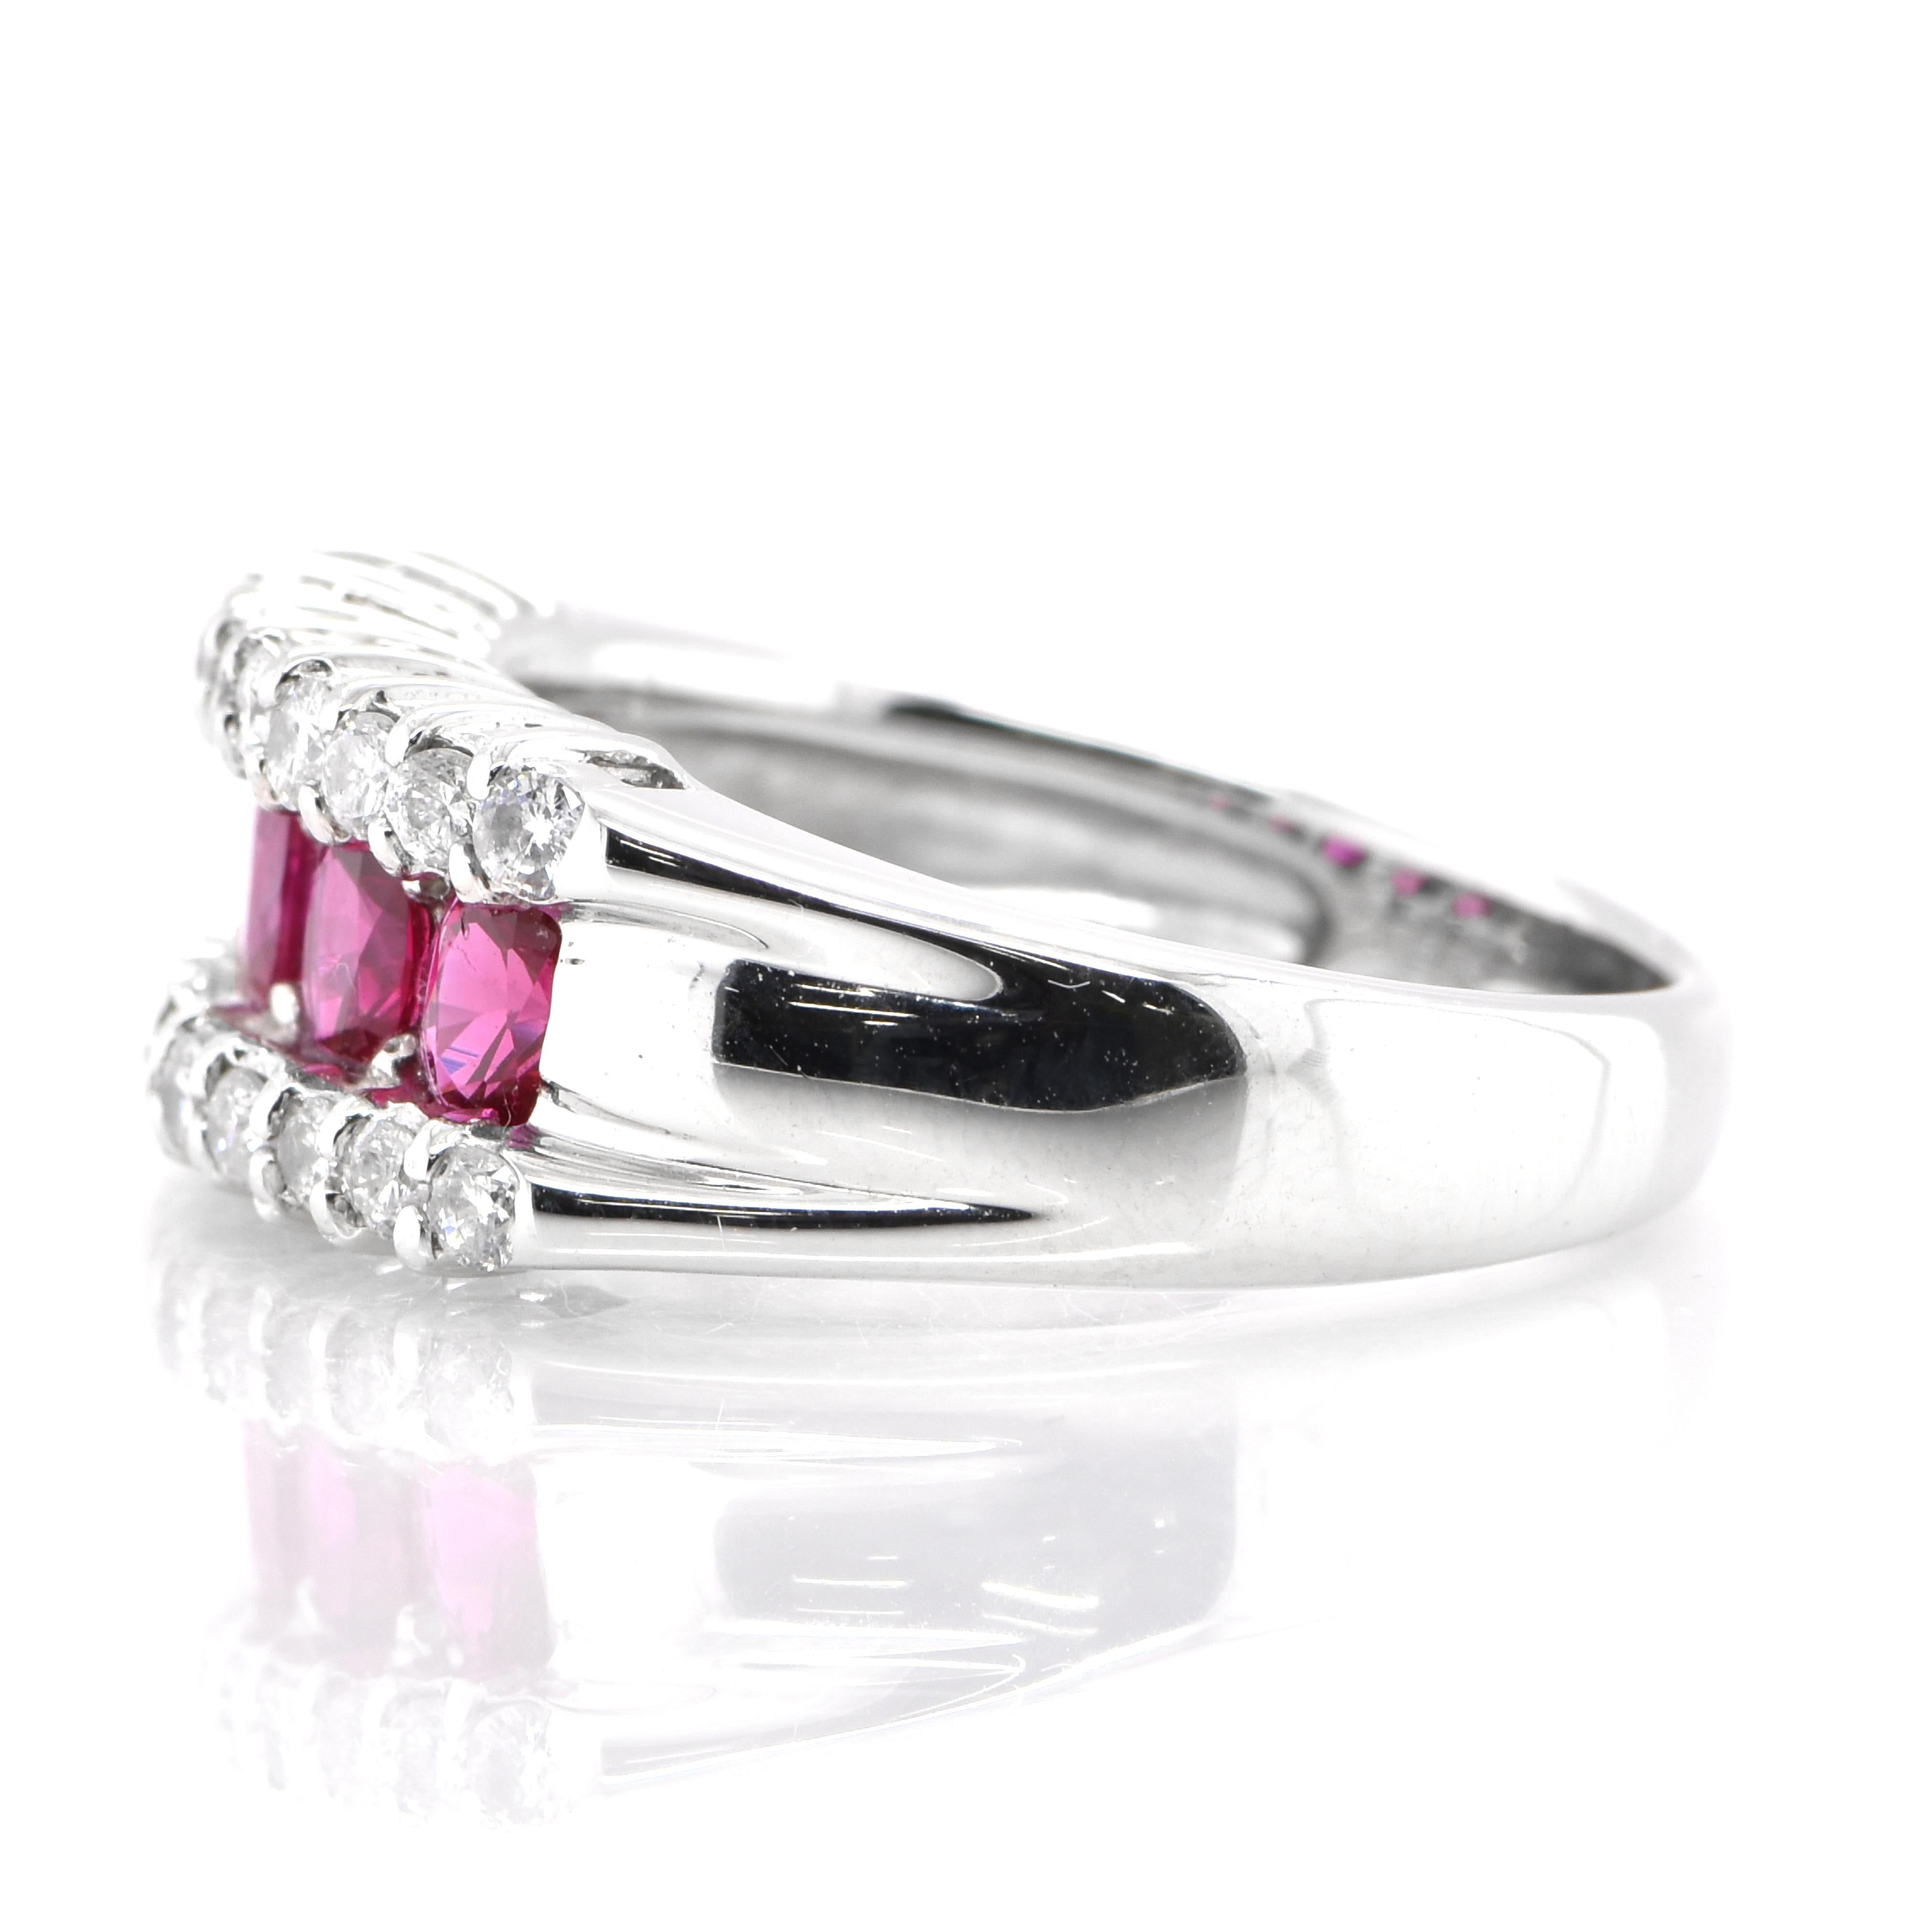 Oval Cut 1.00 Carat Natural Oval Ruby & Diamond Half Eternity Band Ring Set in Platinum